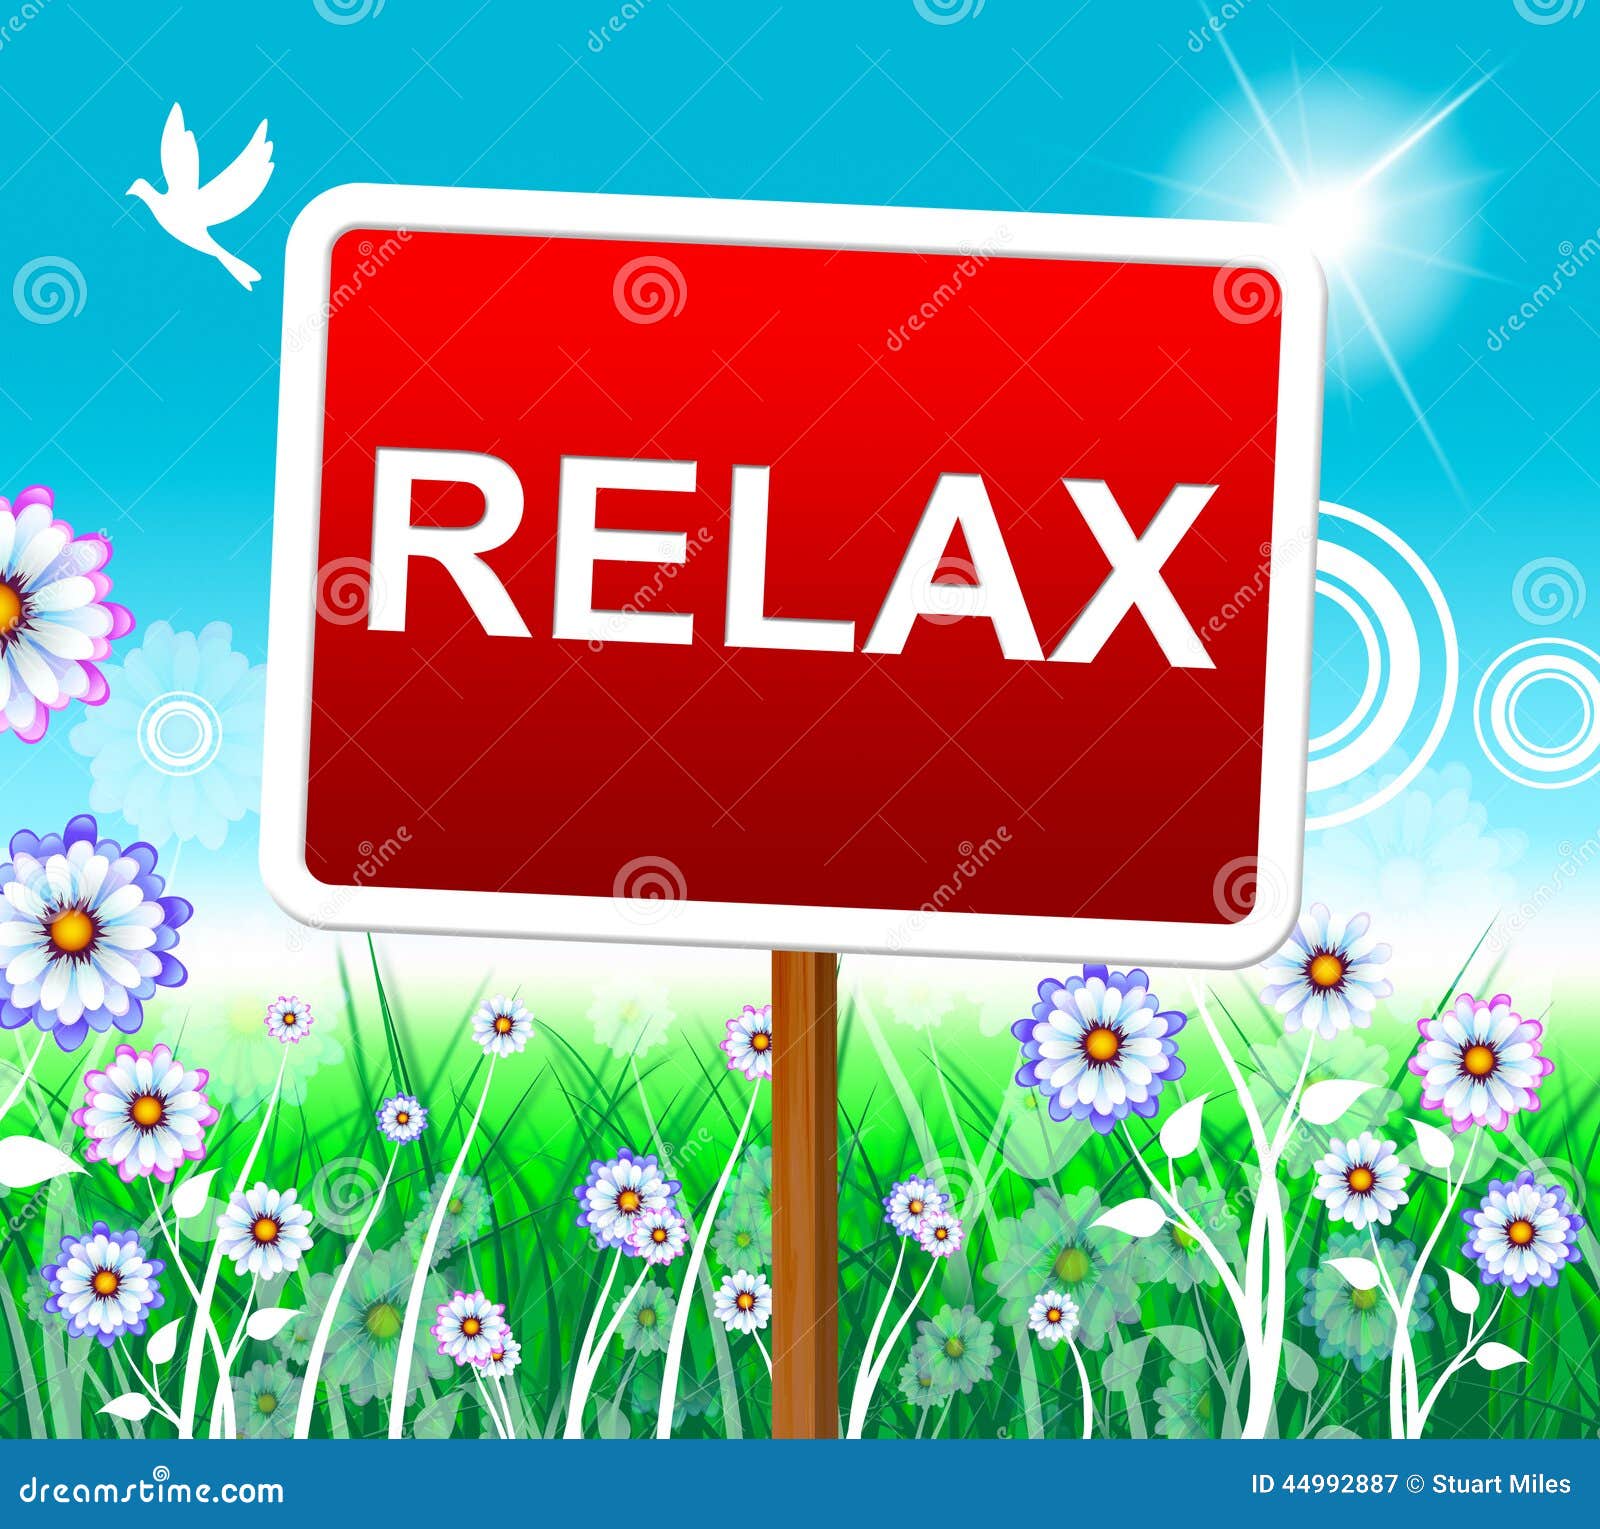 relaxation clipart images - photo #39